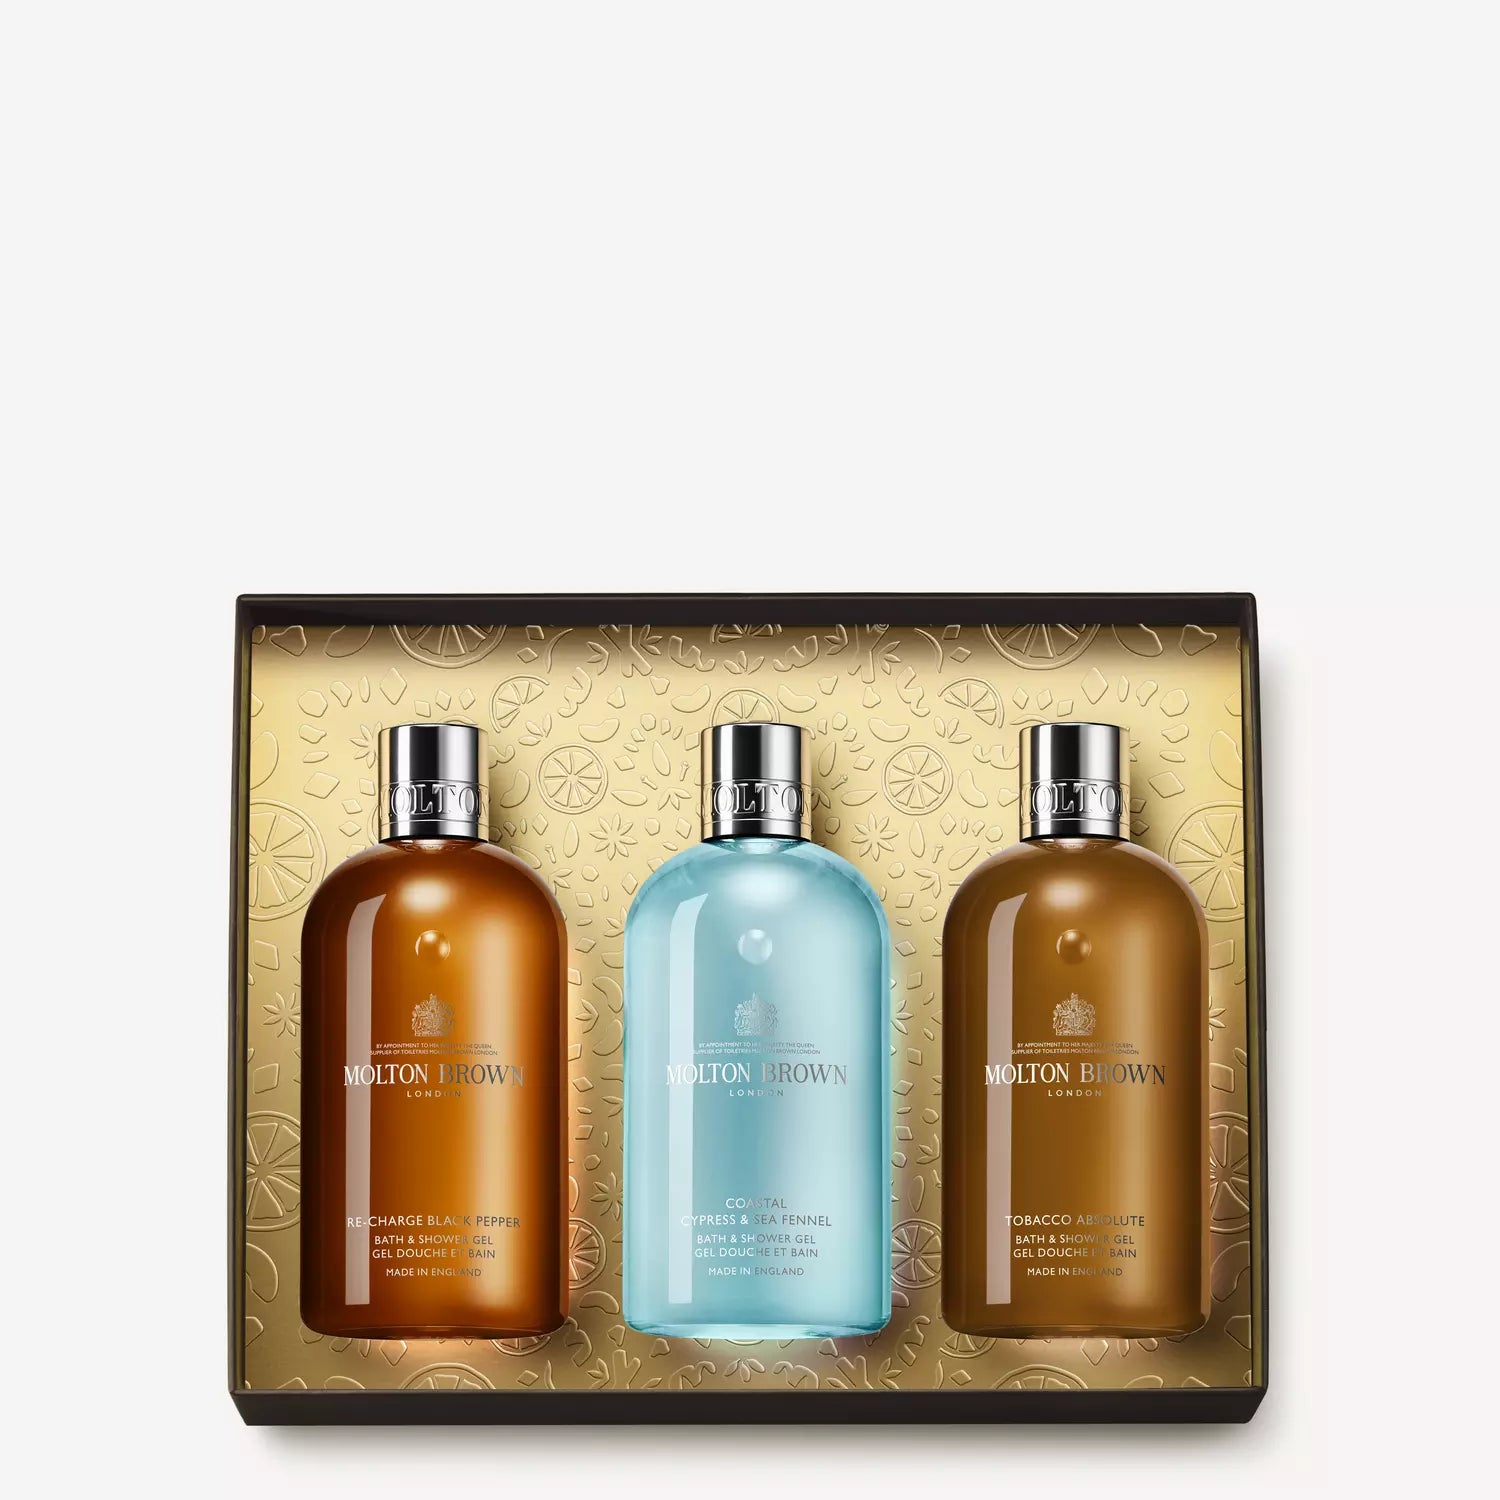 Molton Brown Woody & Aromatic Body Care Gift Set